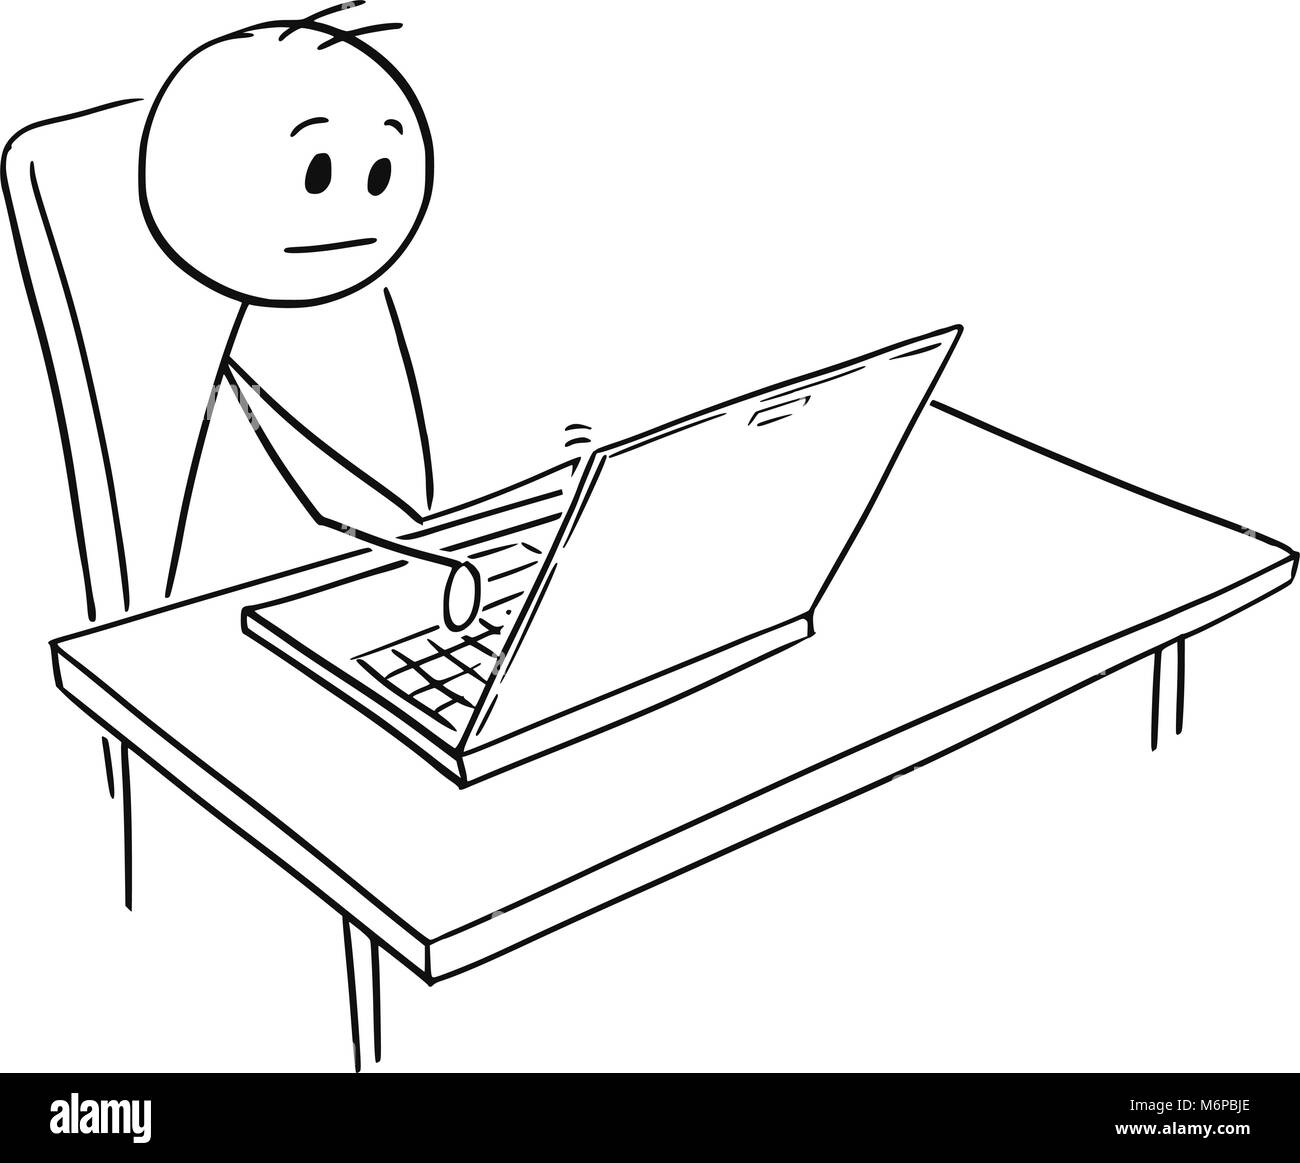 Man Typing Cartoon High Resolution Stock Photography and Images - Alamy